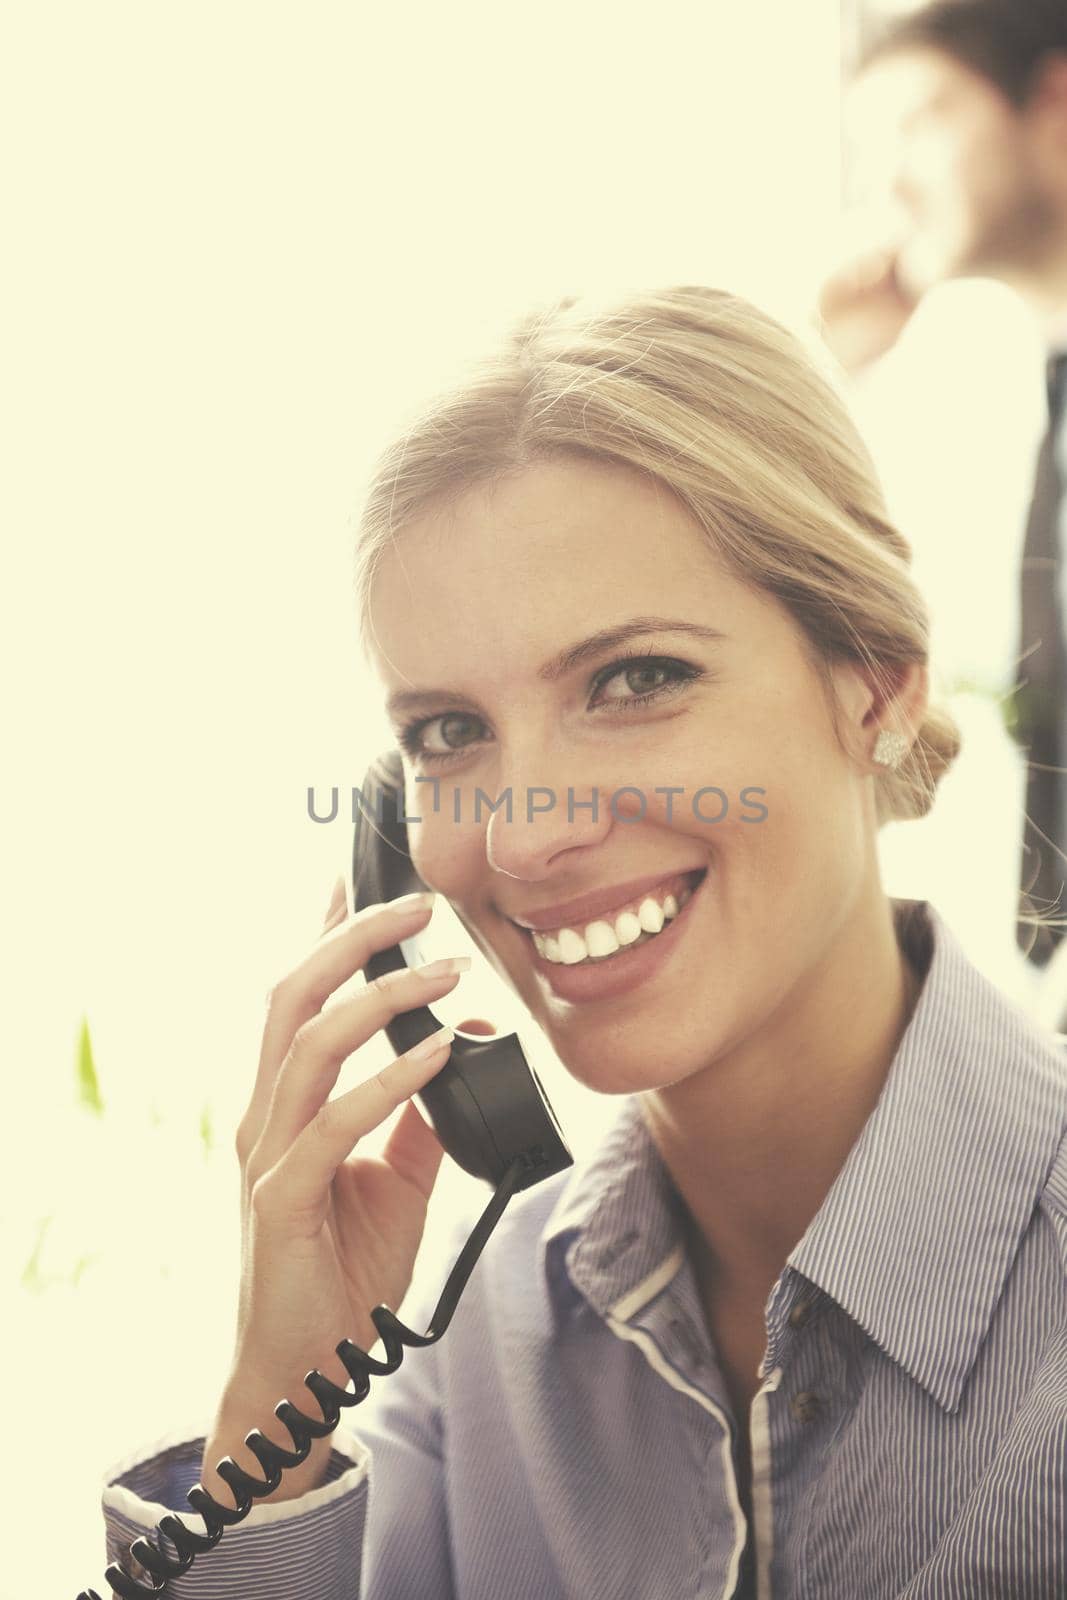 Portrait of a beautiful business woman talk by phone